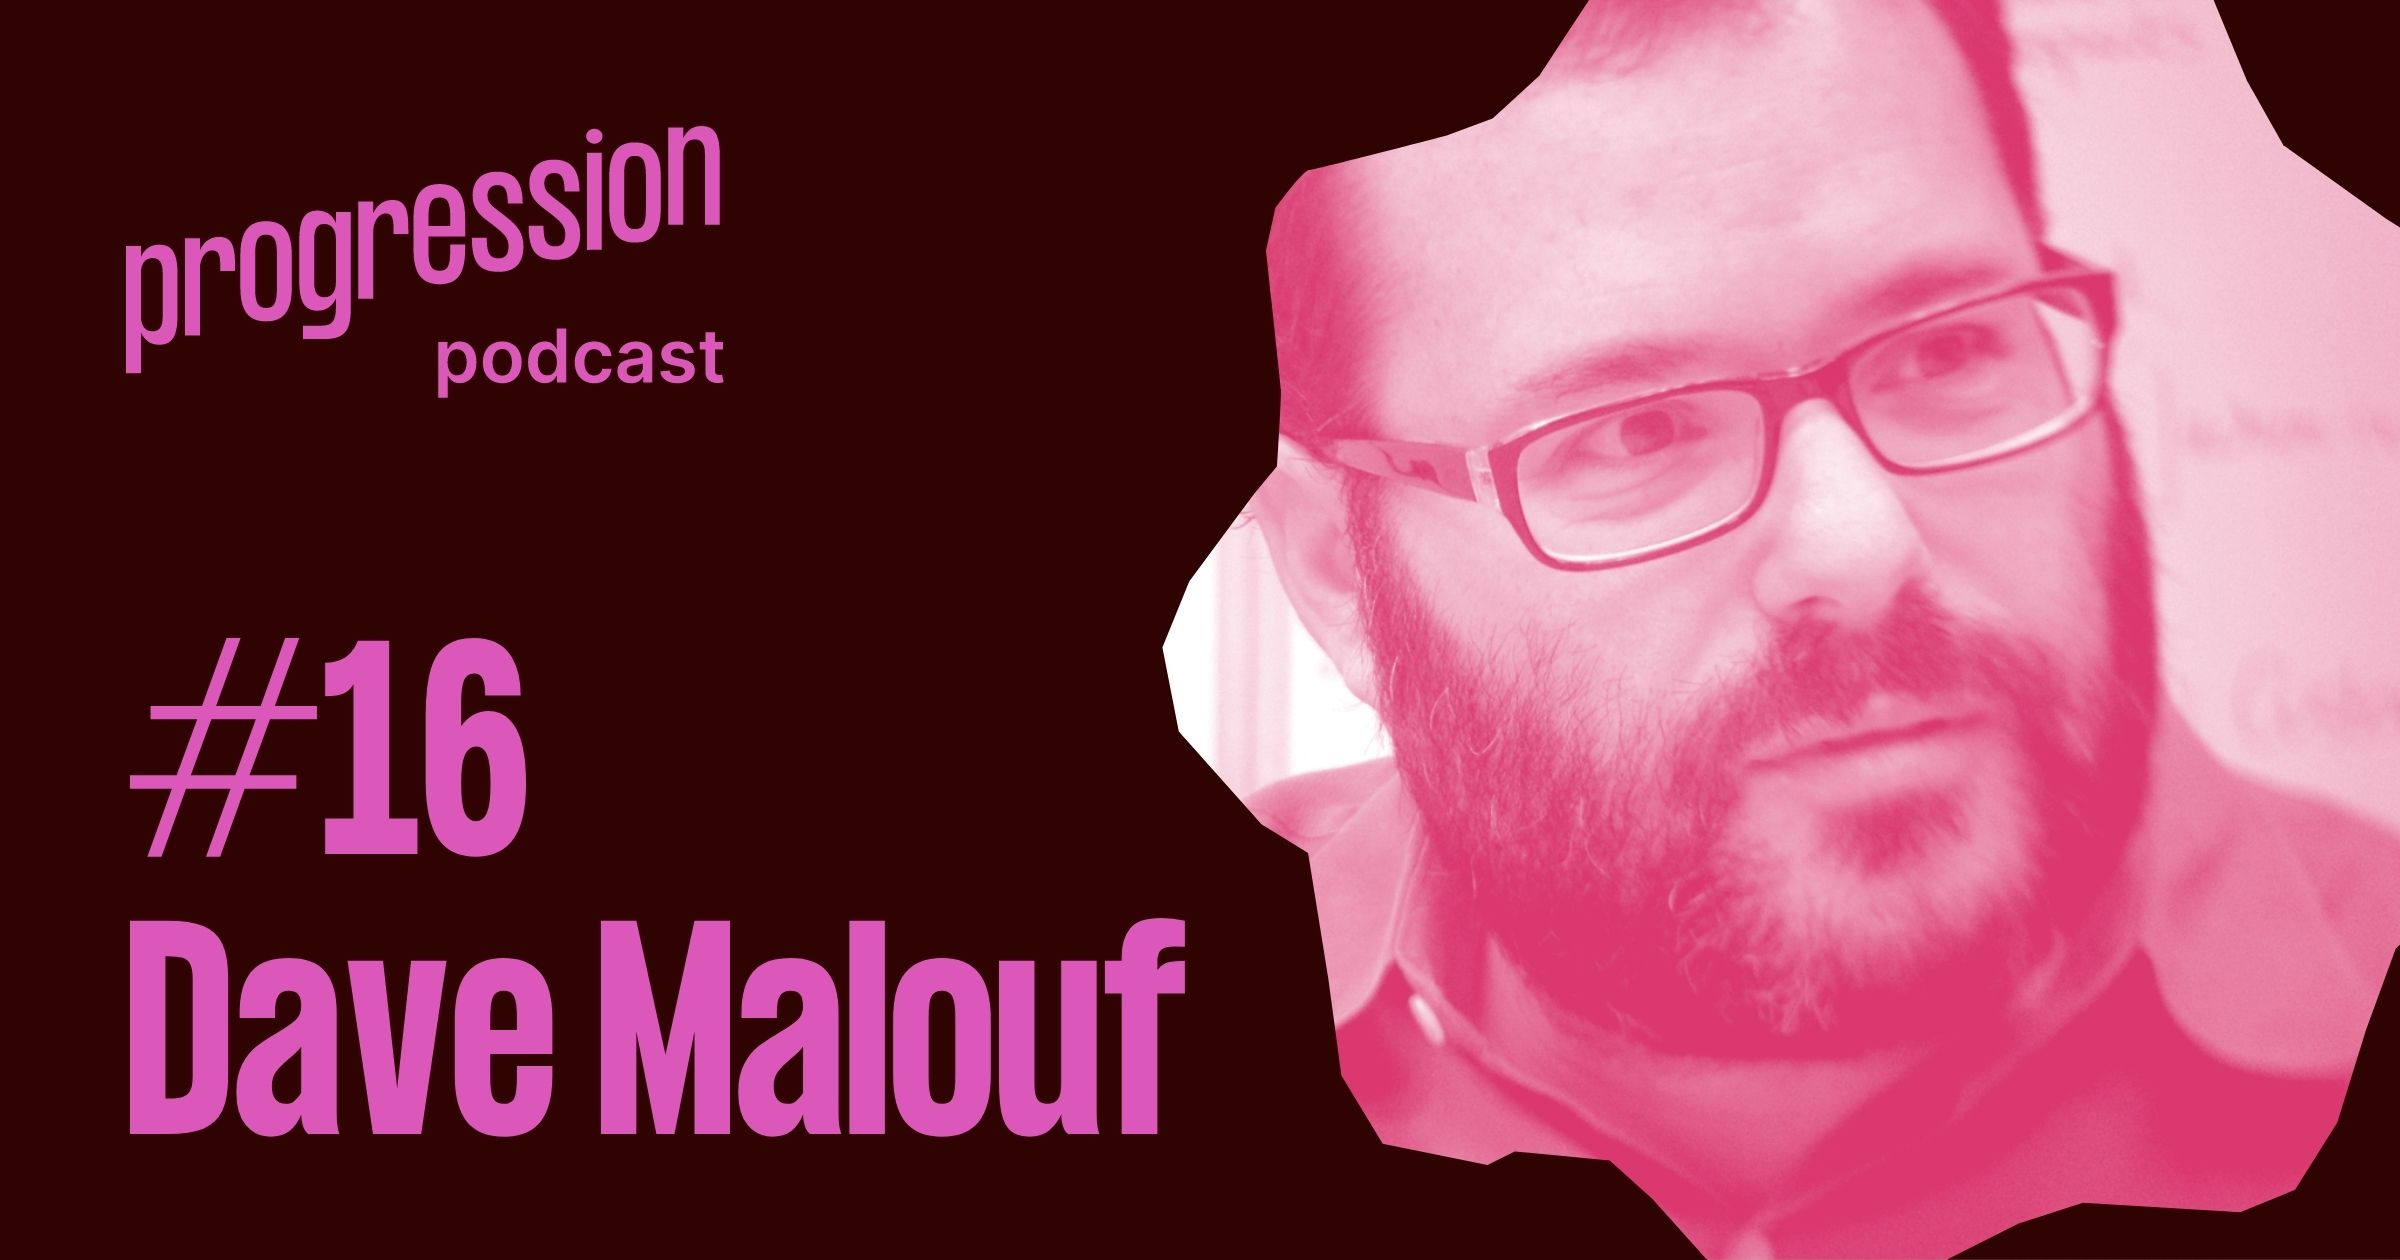 Podcast #16: Dave Malouf on Design Ops and the power of speaking on stage